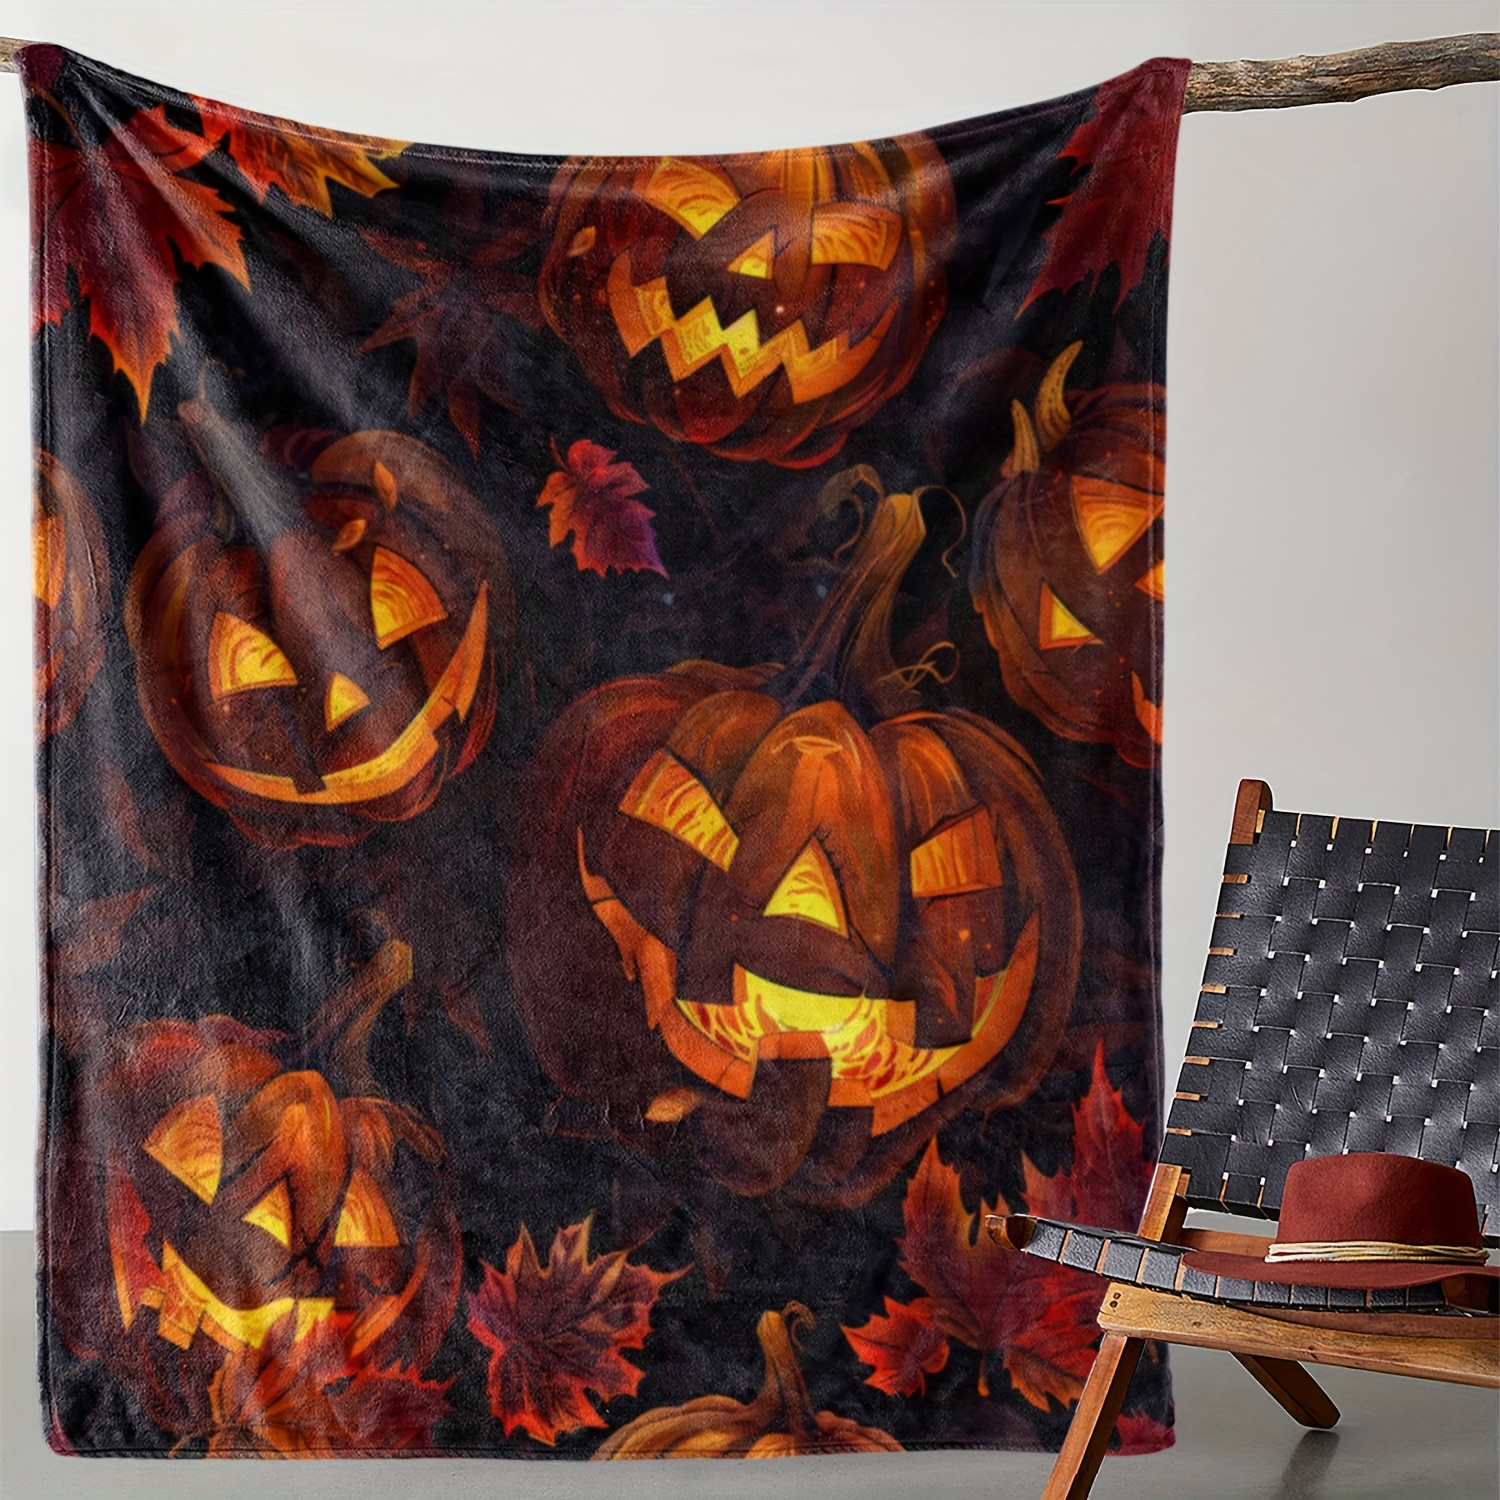 

Vintage Halloween Pumpkin Face Print Flannel Throw Blanket - Cozy, Warm Soft Fleece Cover For Sofa, Bed, Car, Office, Camping, Travel - All-season Polyester Weave, Unique Home Decor Gift